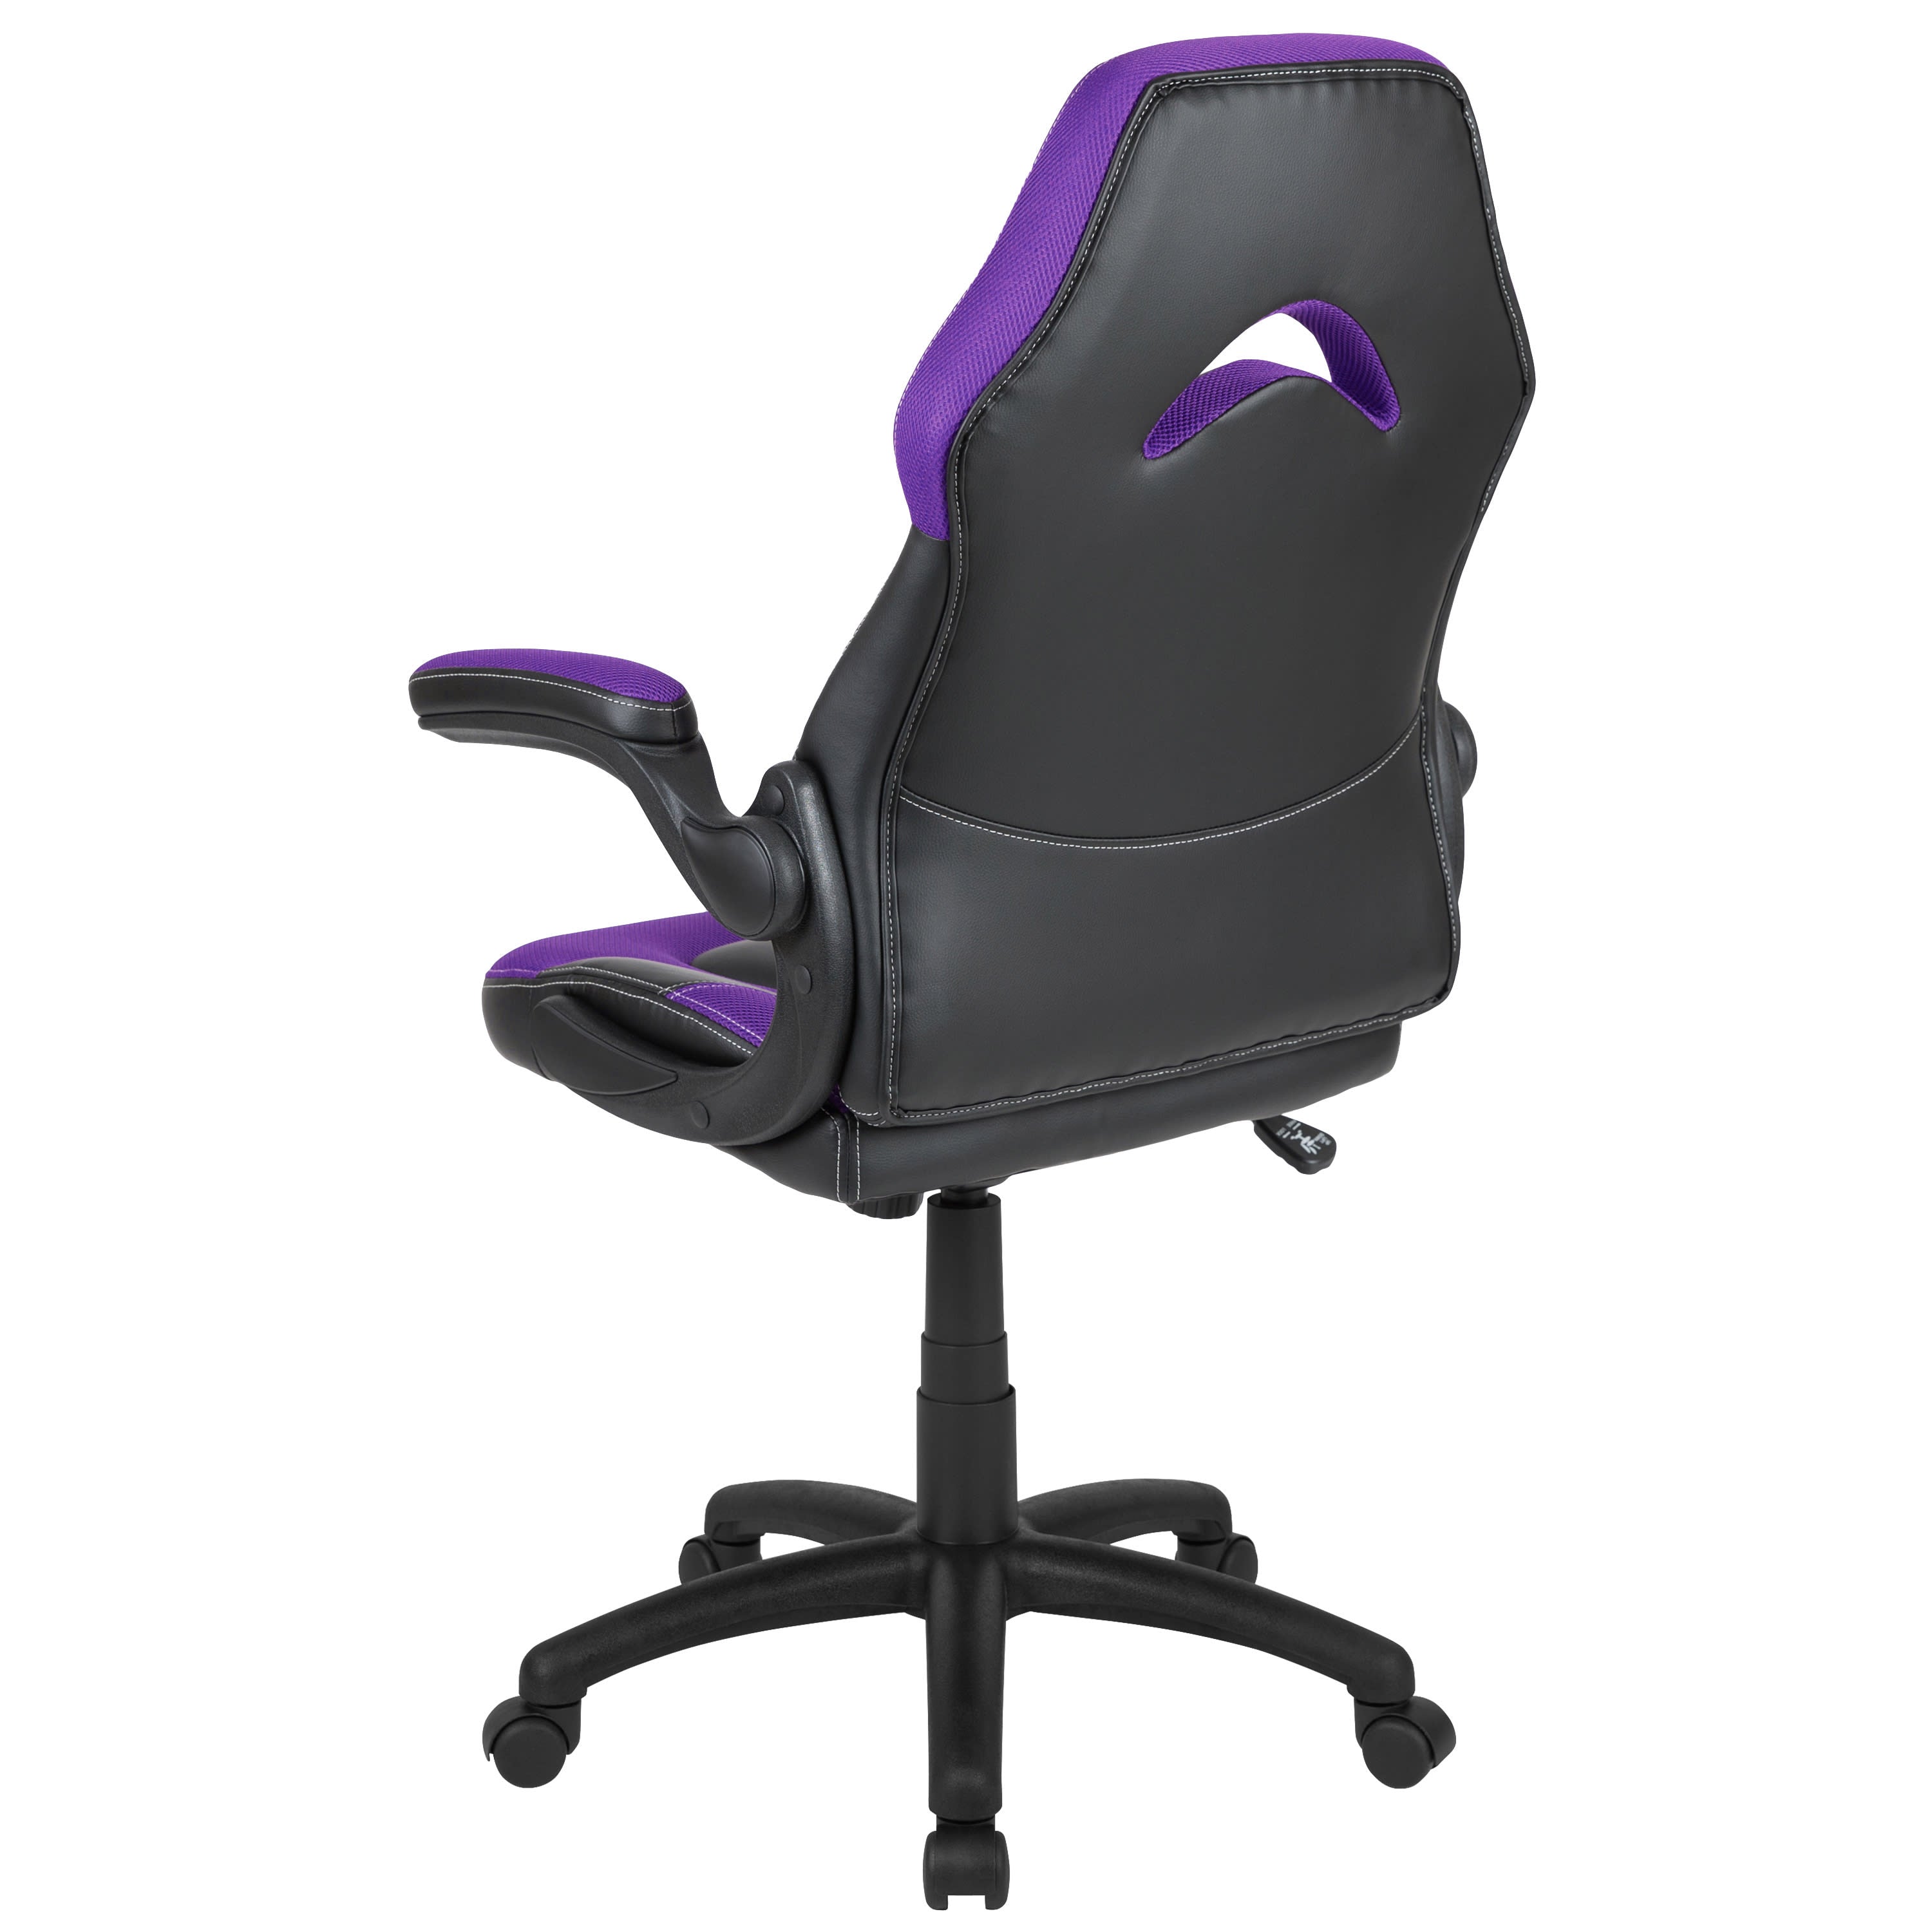 BlackArc Allegiance 1 High Back Gaming Chair with Faux Leather Upholstery,  Height Adjustable Swivel Seat & Padded Flip-Up Arms